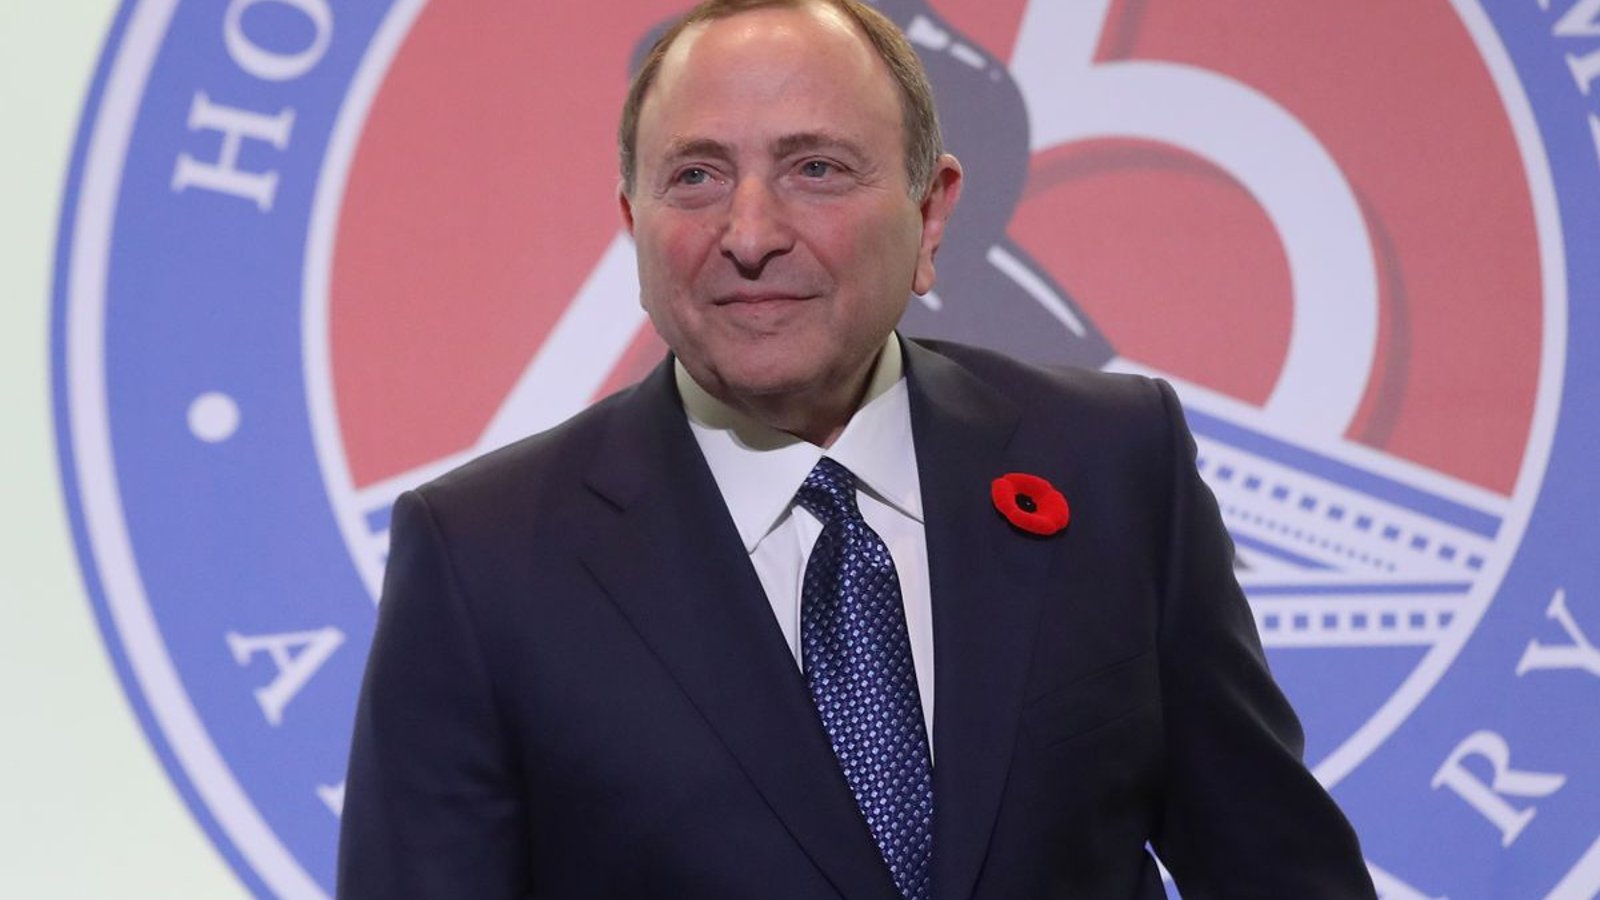 MUST SEE: Bettman gets the worse welcome as he is presented into Hall of Fame class! 